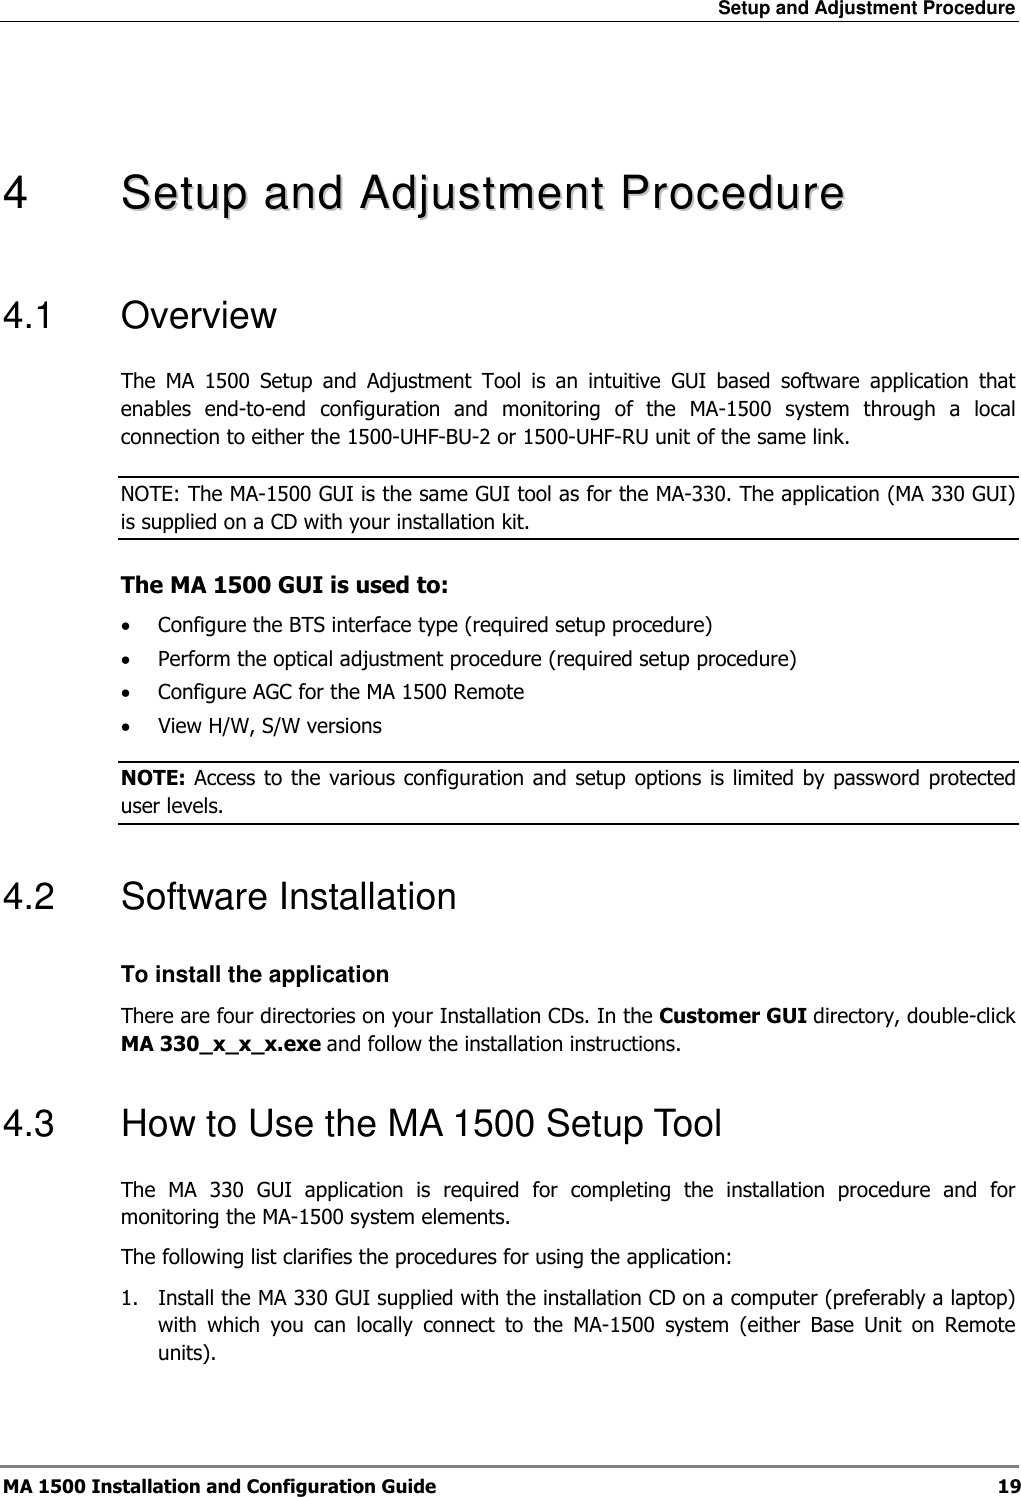 Setup and Adjustment Procedure  MA 1500 Installation and Configuration Guide  19   4   SSeettuupp  aanndd  AAddjjuussttmmeenntt  PPrroocceedduurree  4.1  Overview The  MA  1500  Setup  and  Adjustment  Tool  is  an  intuitive  GUI  based  software  application  that enables  end-to-end  configuration  and  monitoring  of  the  MA-1500  system  through  a  local connection to either the 1500-UHF-BU-2 or 1500-UHF-RU unit of the same link.  NOTE: The MA-1500 GUI is the same GUI tool as for the MA-330. The application (MA 330 GUI) is supplied on a CD with your installation kit.  The MA 1500 GUI is used to: • Configure the BTS interface type (required setup procedure) • Perform the optical adjustment procedure (required setup procedure) • Configure AGC for the MA 1500 Remote • View H/W, S/W versions NOTE: Access to the  various configuration  and  setup options is limited  by password protected user levels. 4.2  Software Installation  To install the application There are four directories on your Installation CDs. In the Customer GUI directory, double-click MA 330_x_x_x.exe and follow the installation instructions. 4.3  How to Use the MA 1500 Setup Tool The  MA  330  GUI  application  is  required  for  completing  the  installation  procedure  and  for monitoring the MA-1500 system elements.   The following list clarifies the procedures for using the application: 1.  Install the MA 330 GUI supplied with the installation CD on a computer (preferably a laptop) with  which  you  can  locally  connect  to  the  MA-1500  system  (either  Base  Unit  on  Remote units). 